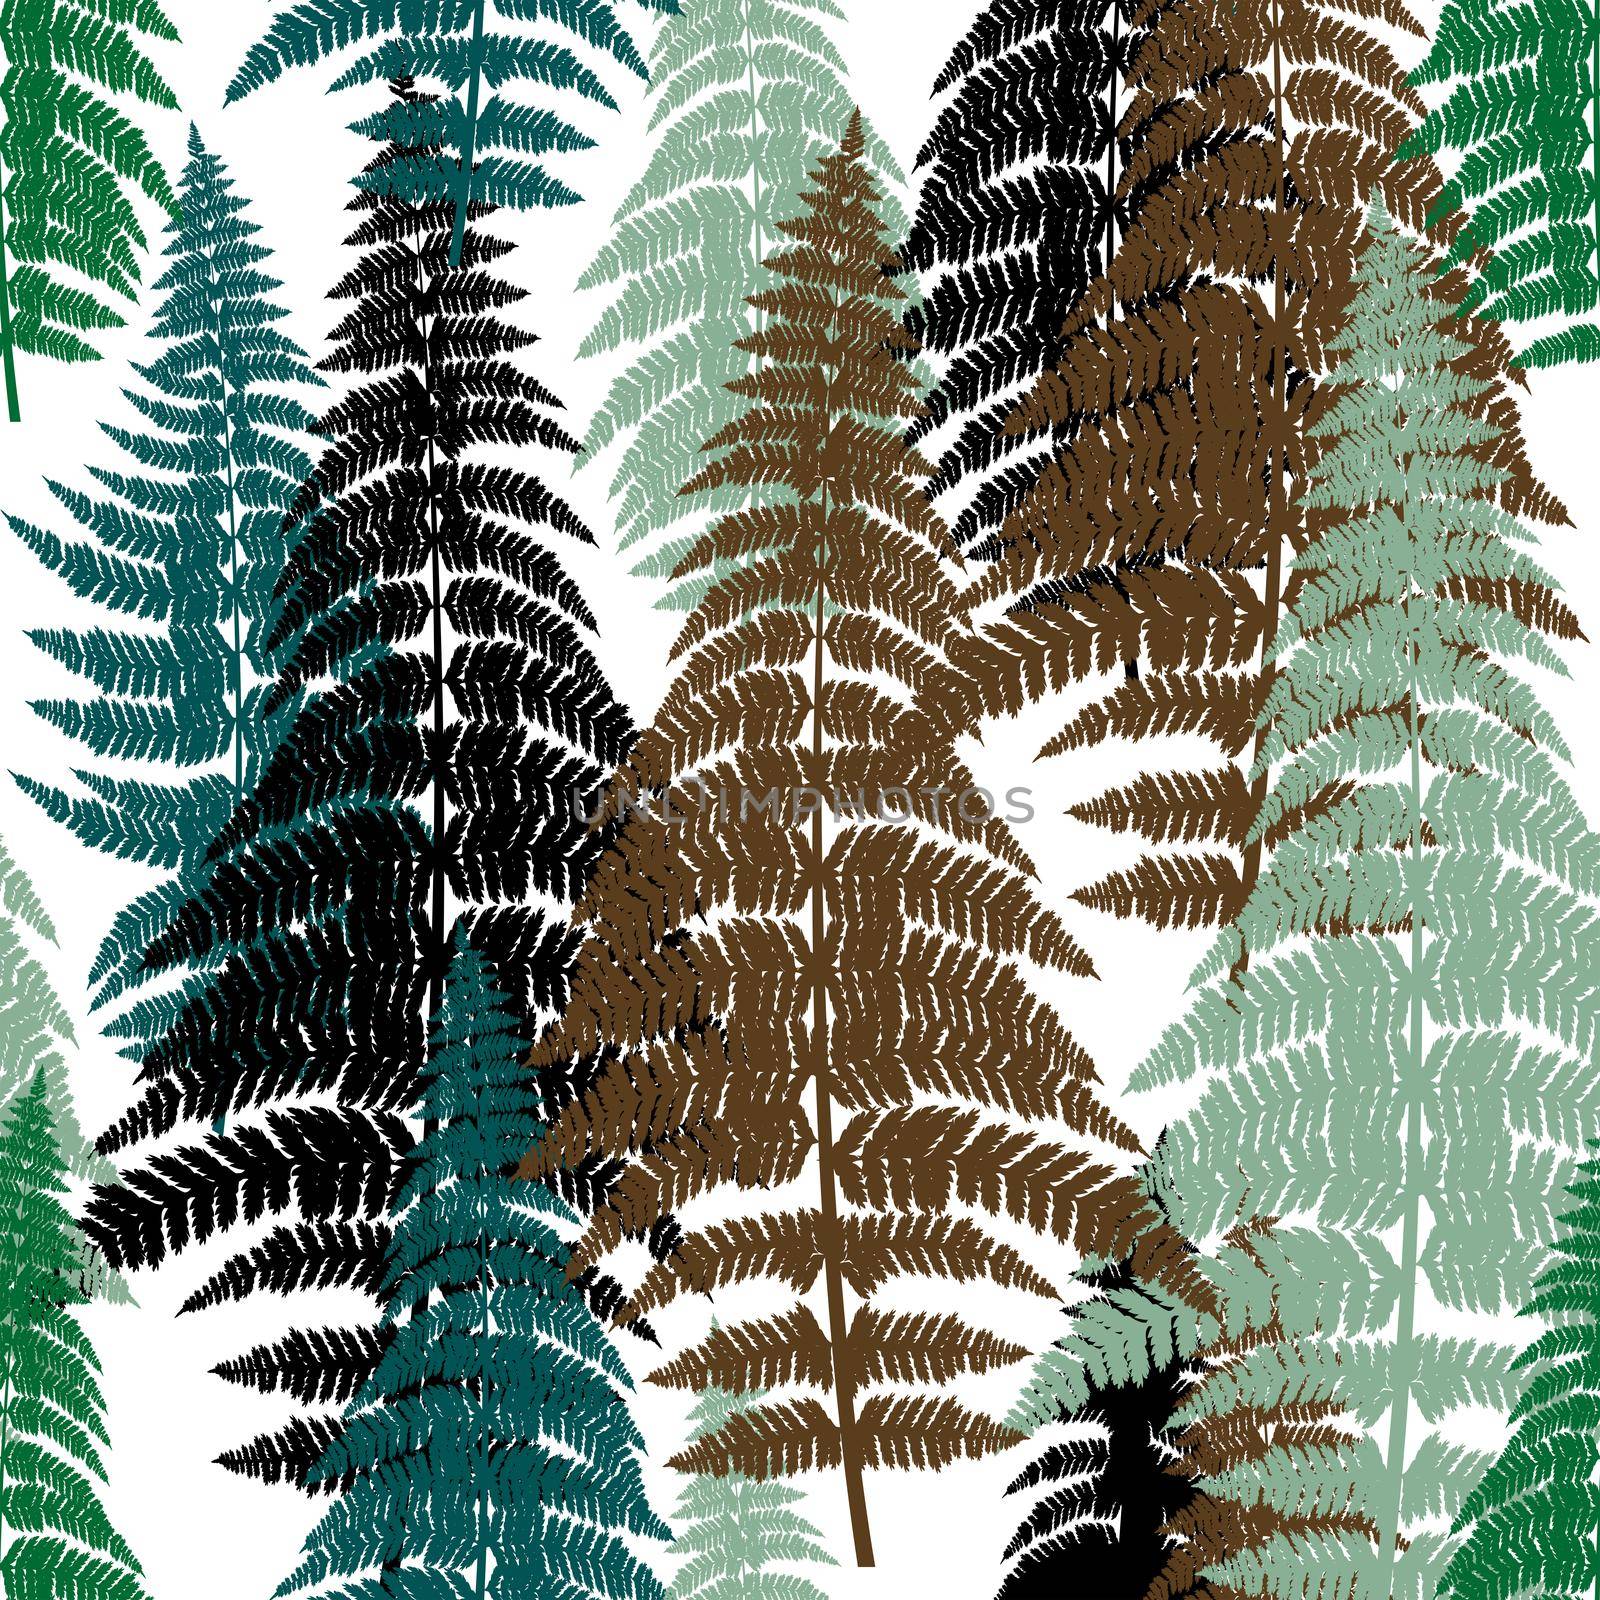 Seamless background with fern leaves by hibrida13